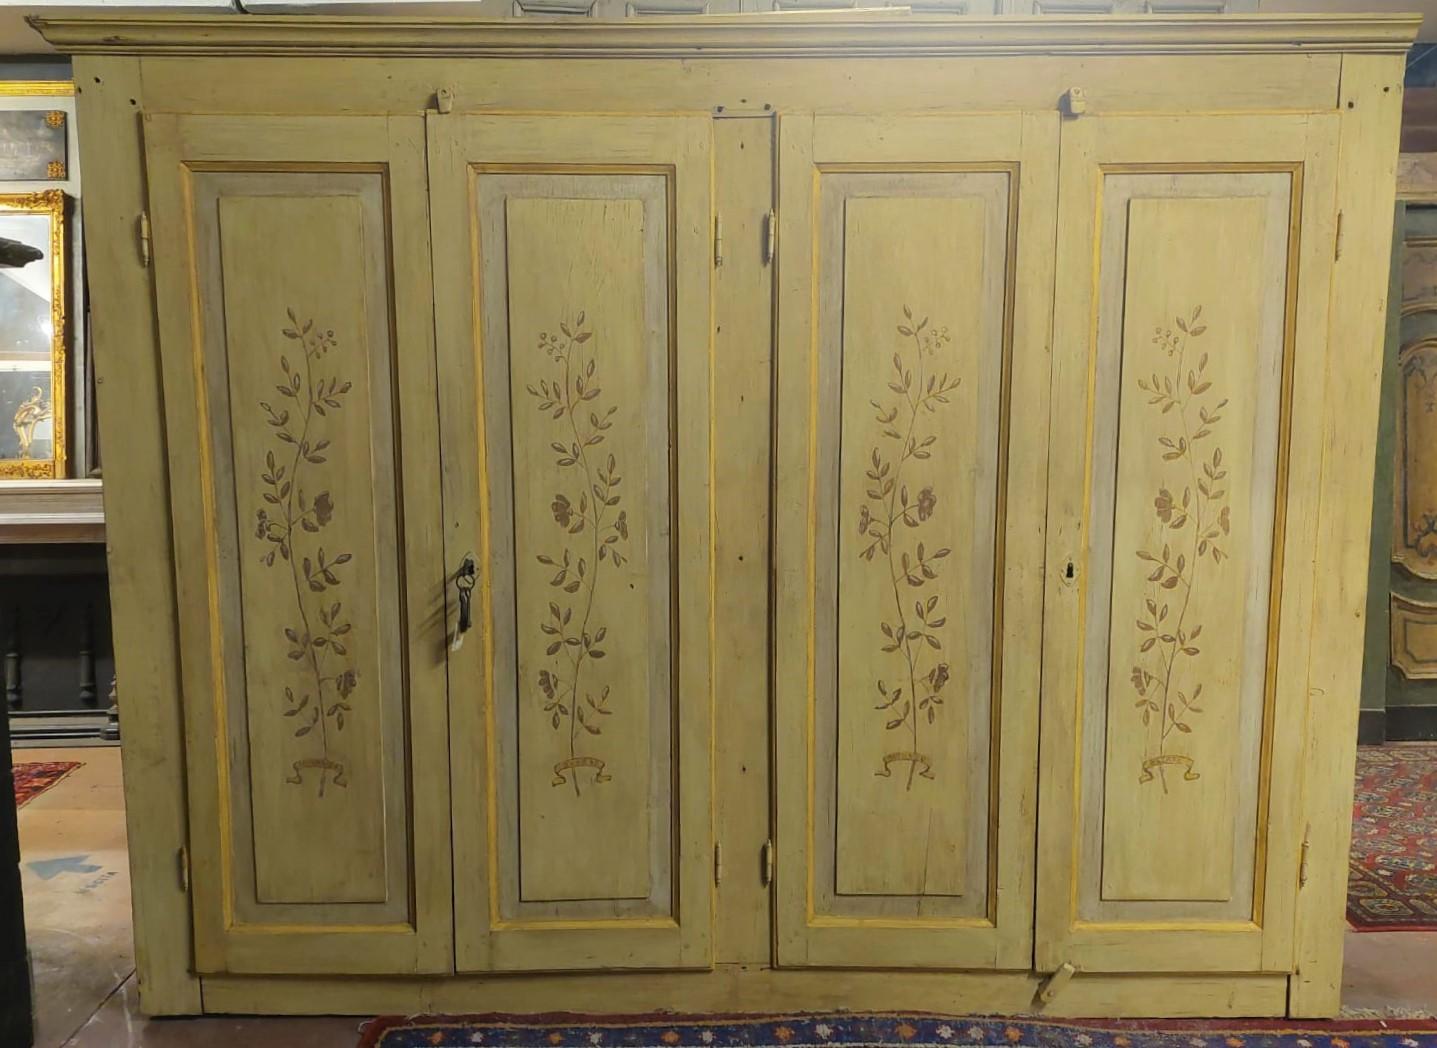 Antique wardrobe wardrobe, consisting of 4 doors, in lacquered wood and hand painted with floral motifs, built in Italy in the 18th century, maximum dimensions cm W 262 x H 208 x D 60, ideal for bedrooms, both private and hotel, has a wooden closure